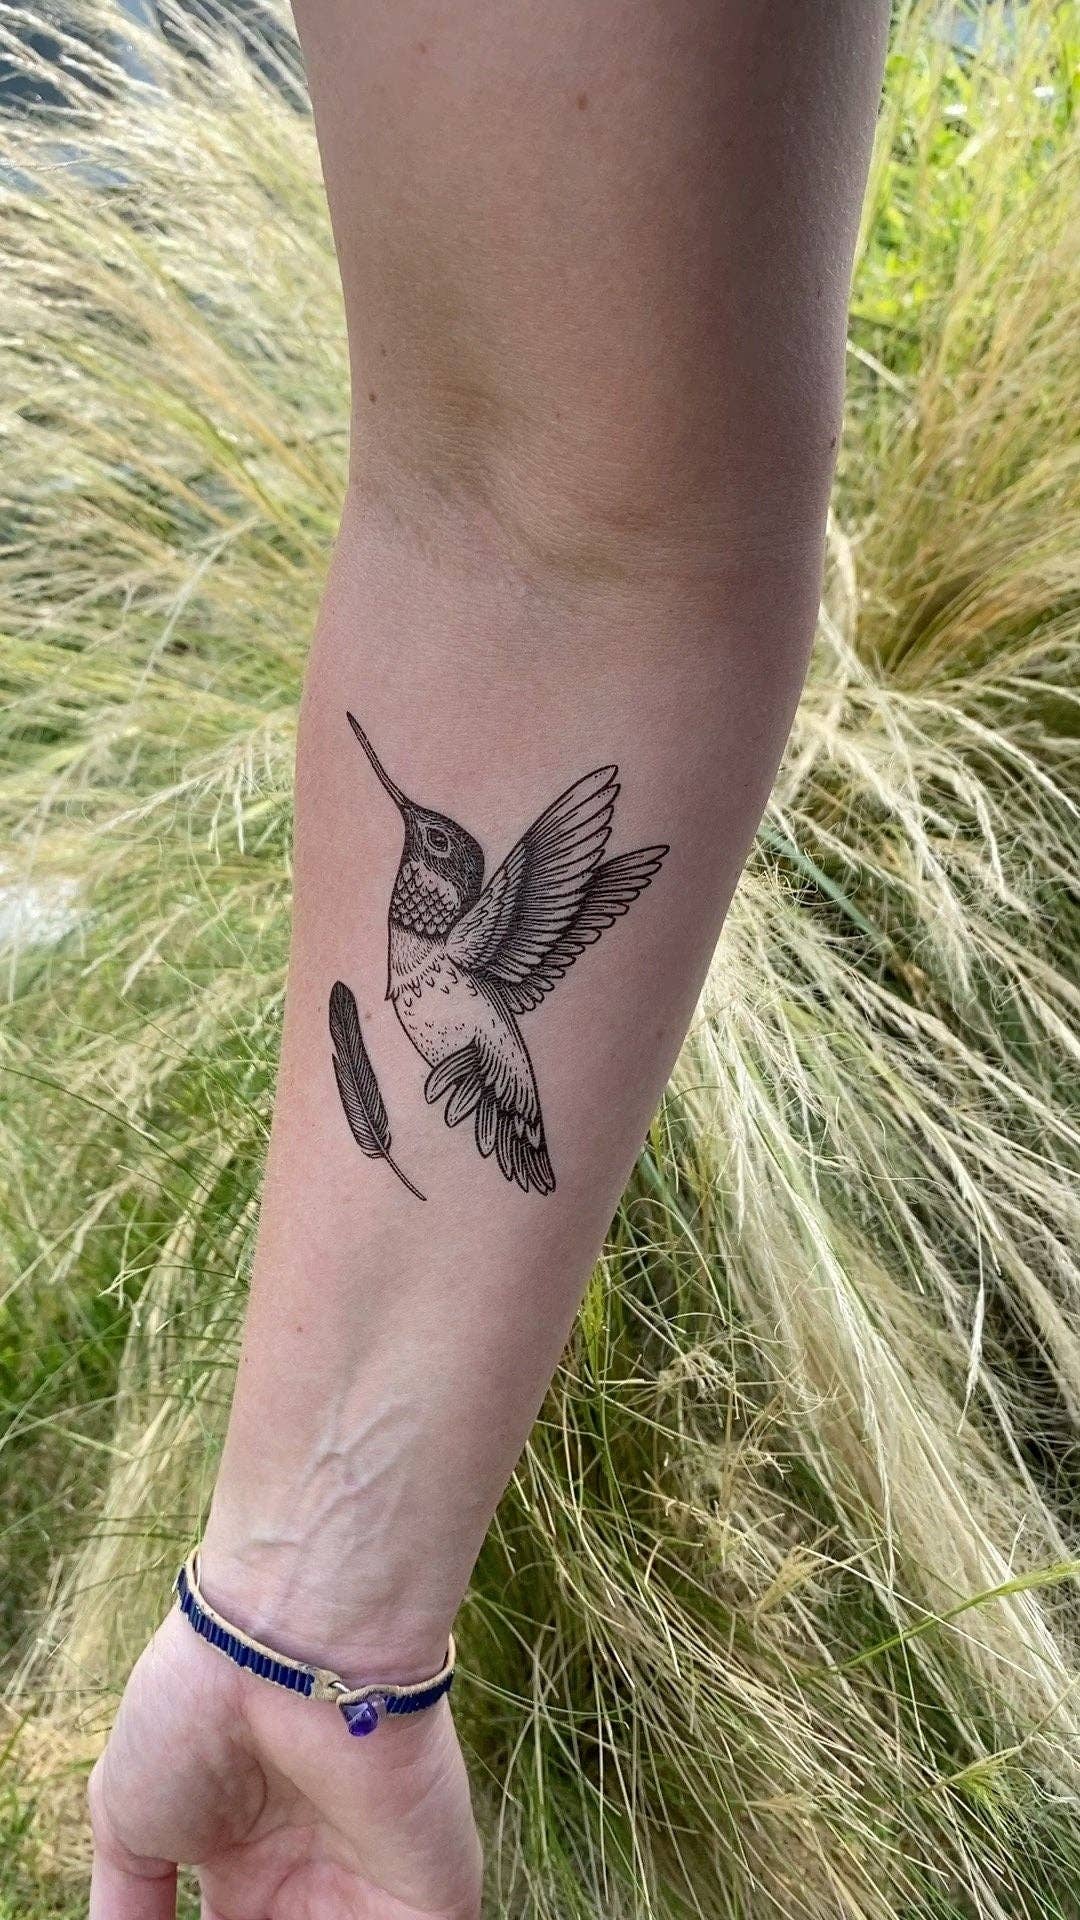 Bird Tattoos That Will Remind You To Fly With Your Own Wings - Cultura  Colectiva